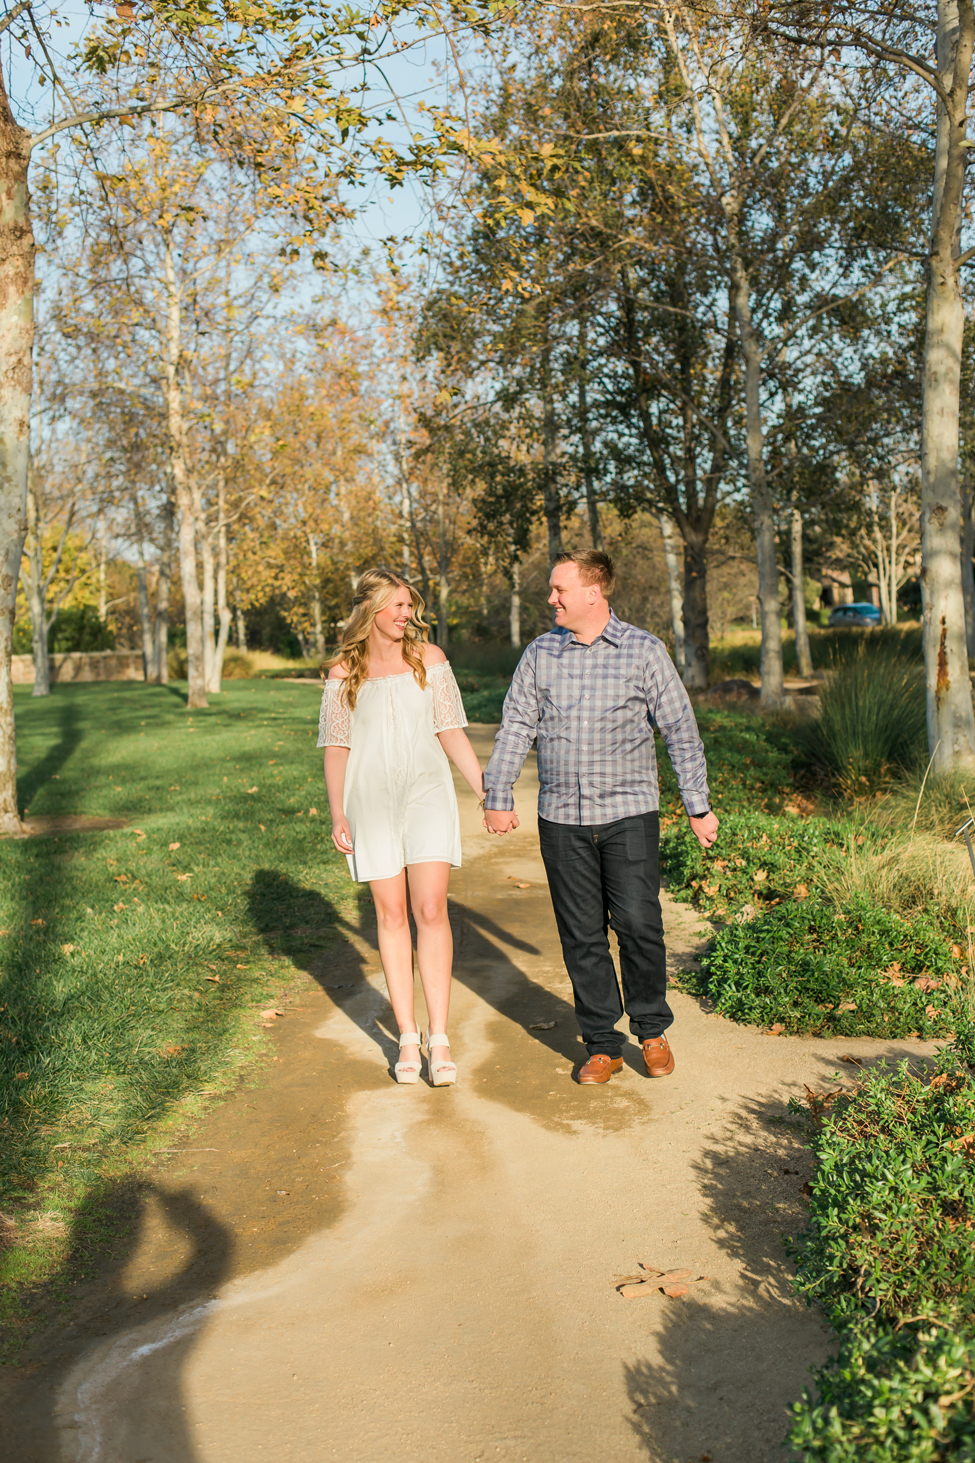 Exceptional Irvine park for engagement photo session